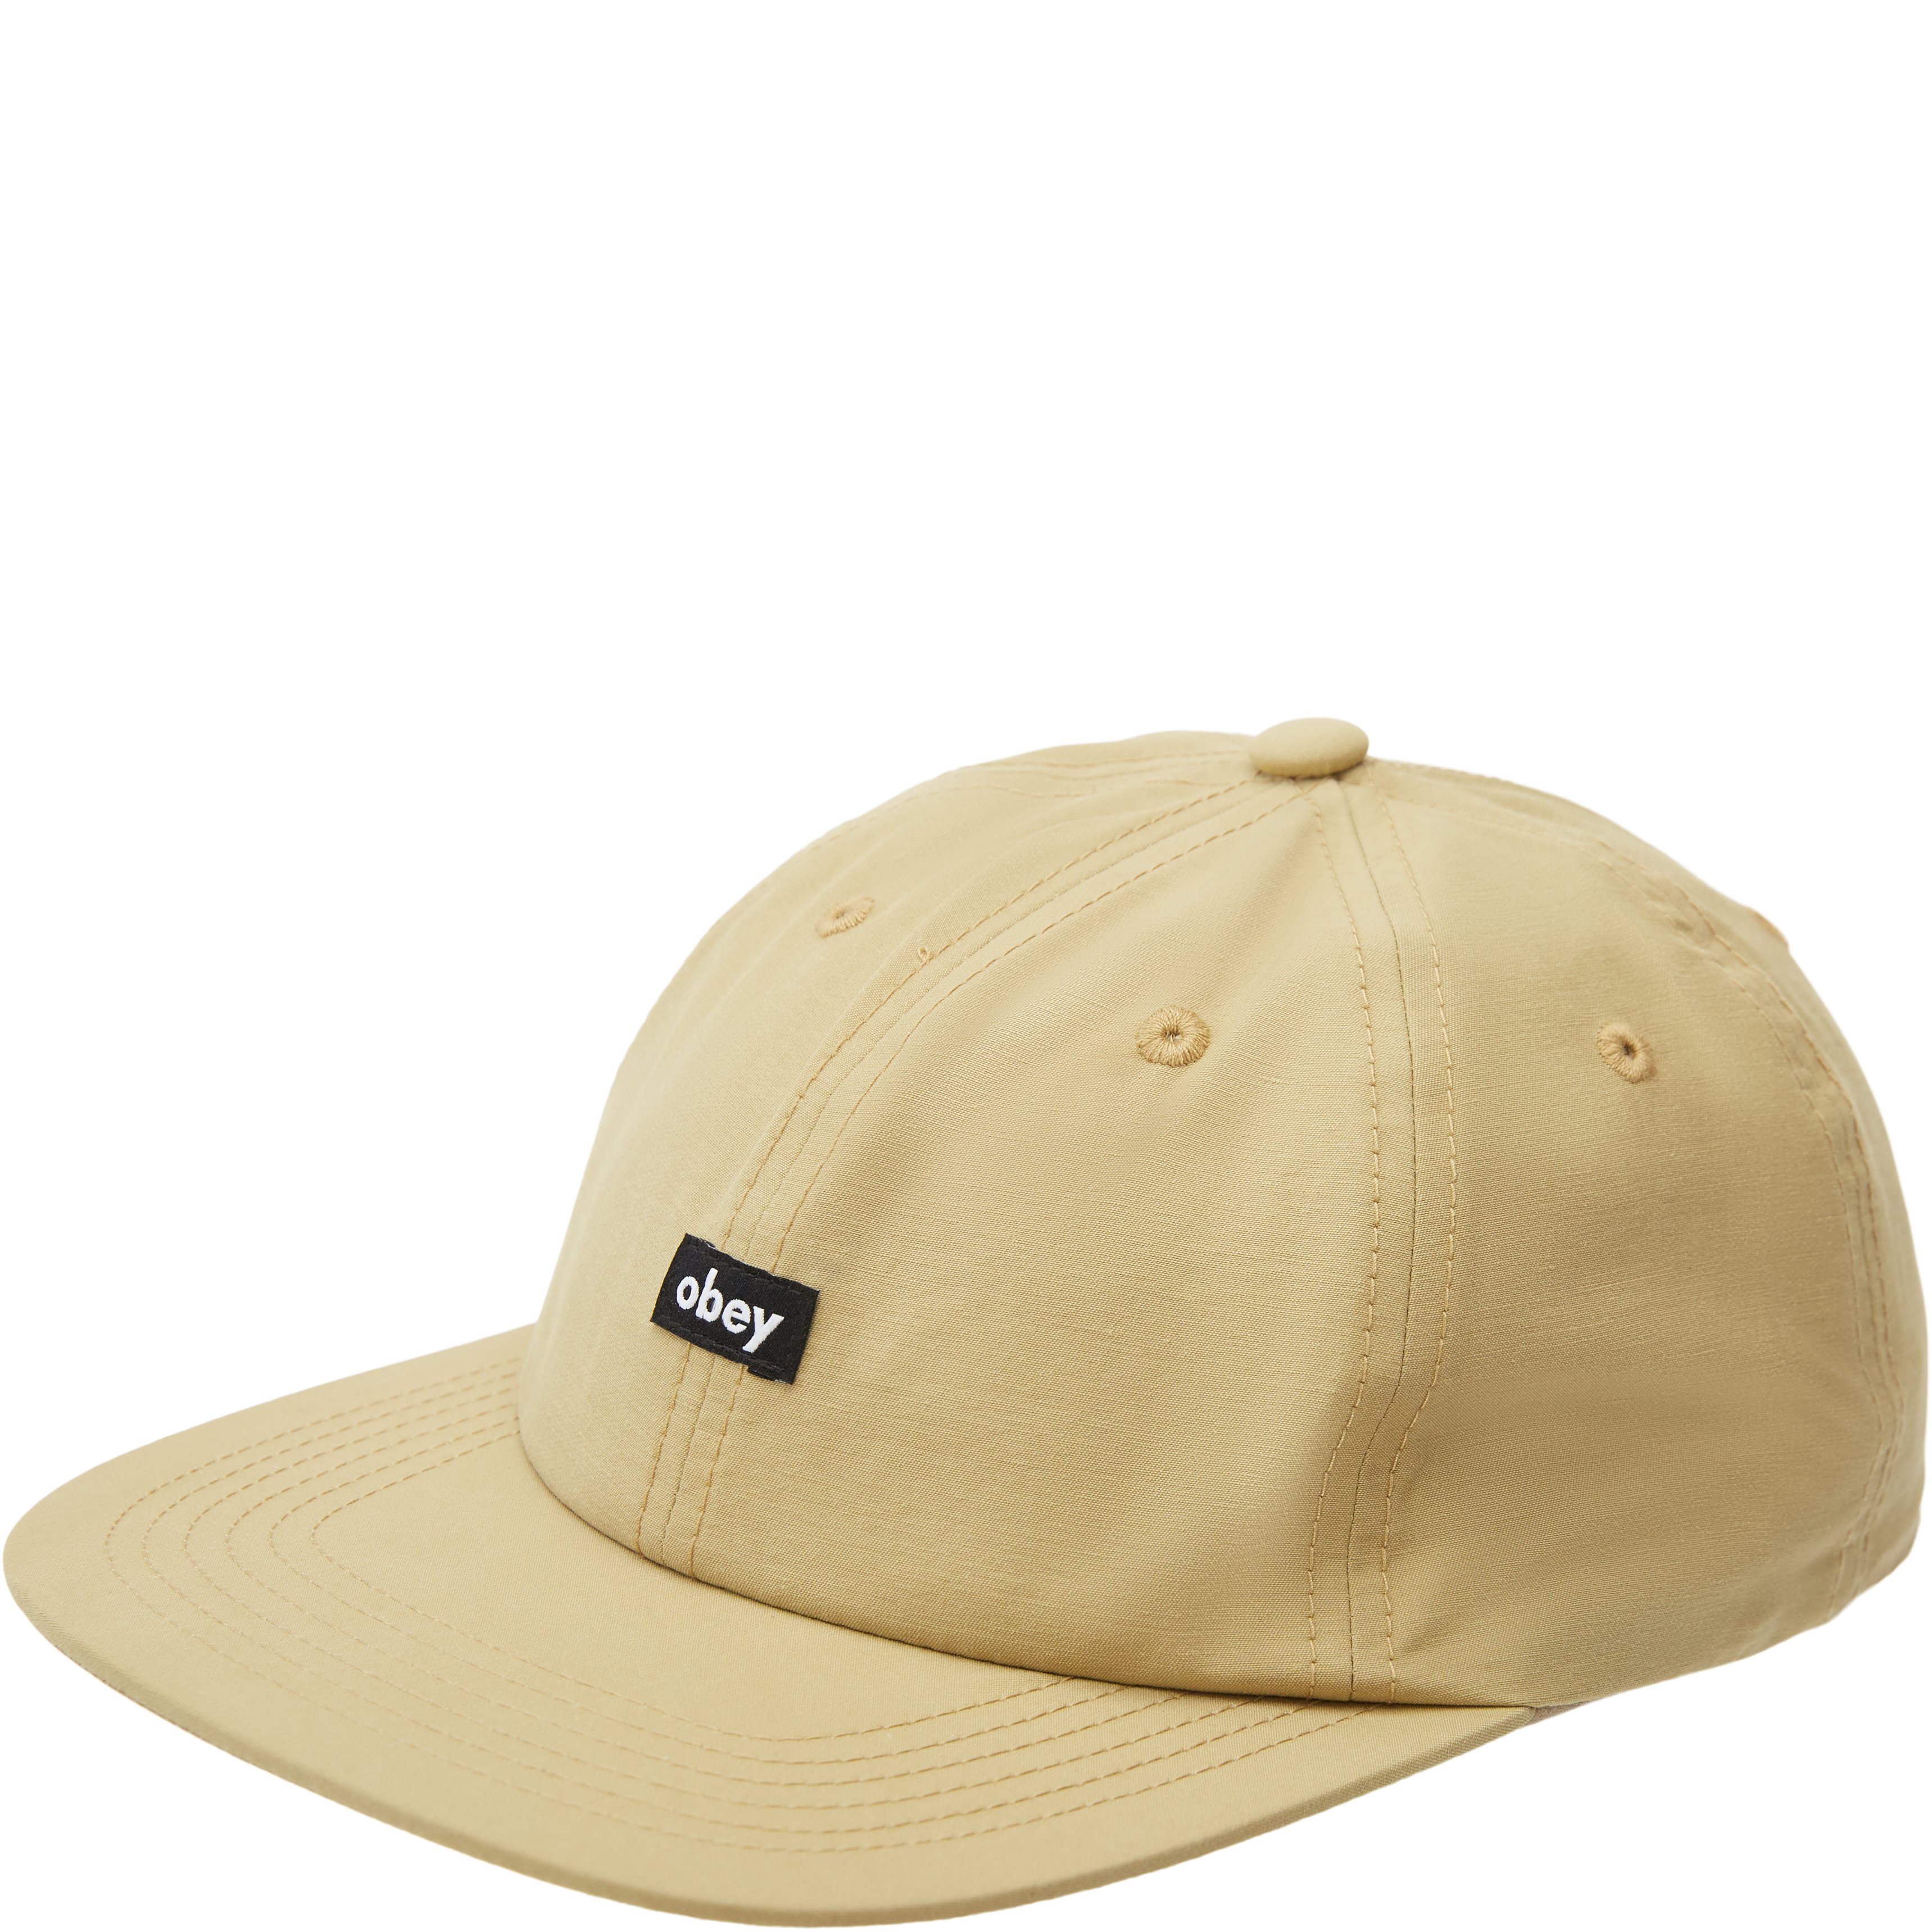 Obey Caps LOWER CASE TECH 100580339 Sand